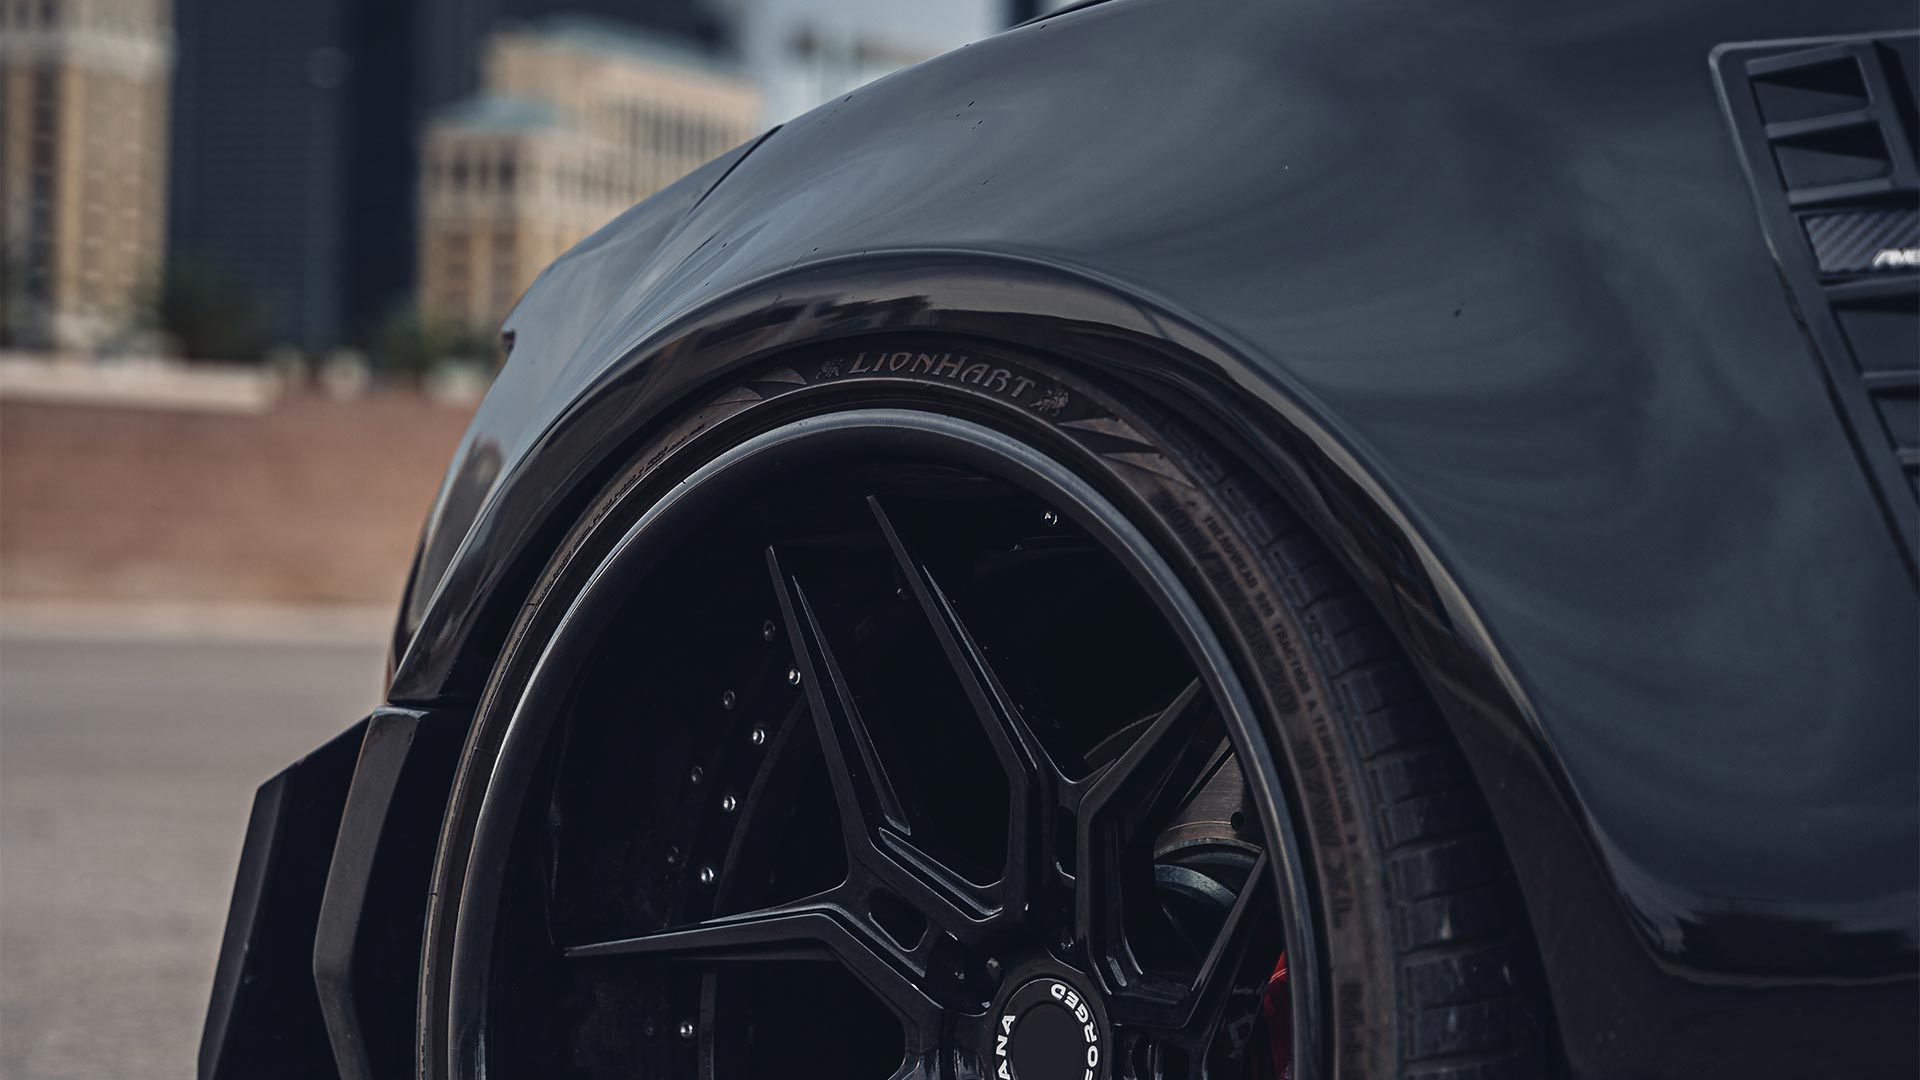 Image of a black Chevrolet Camaro with Lionhart Tires